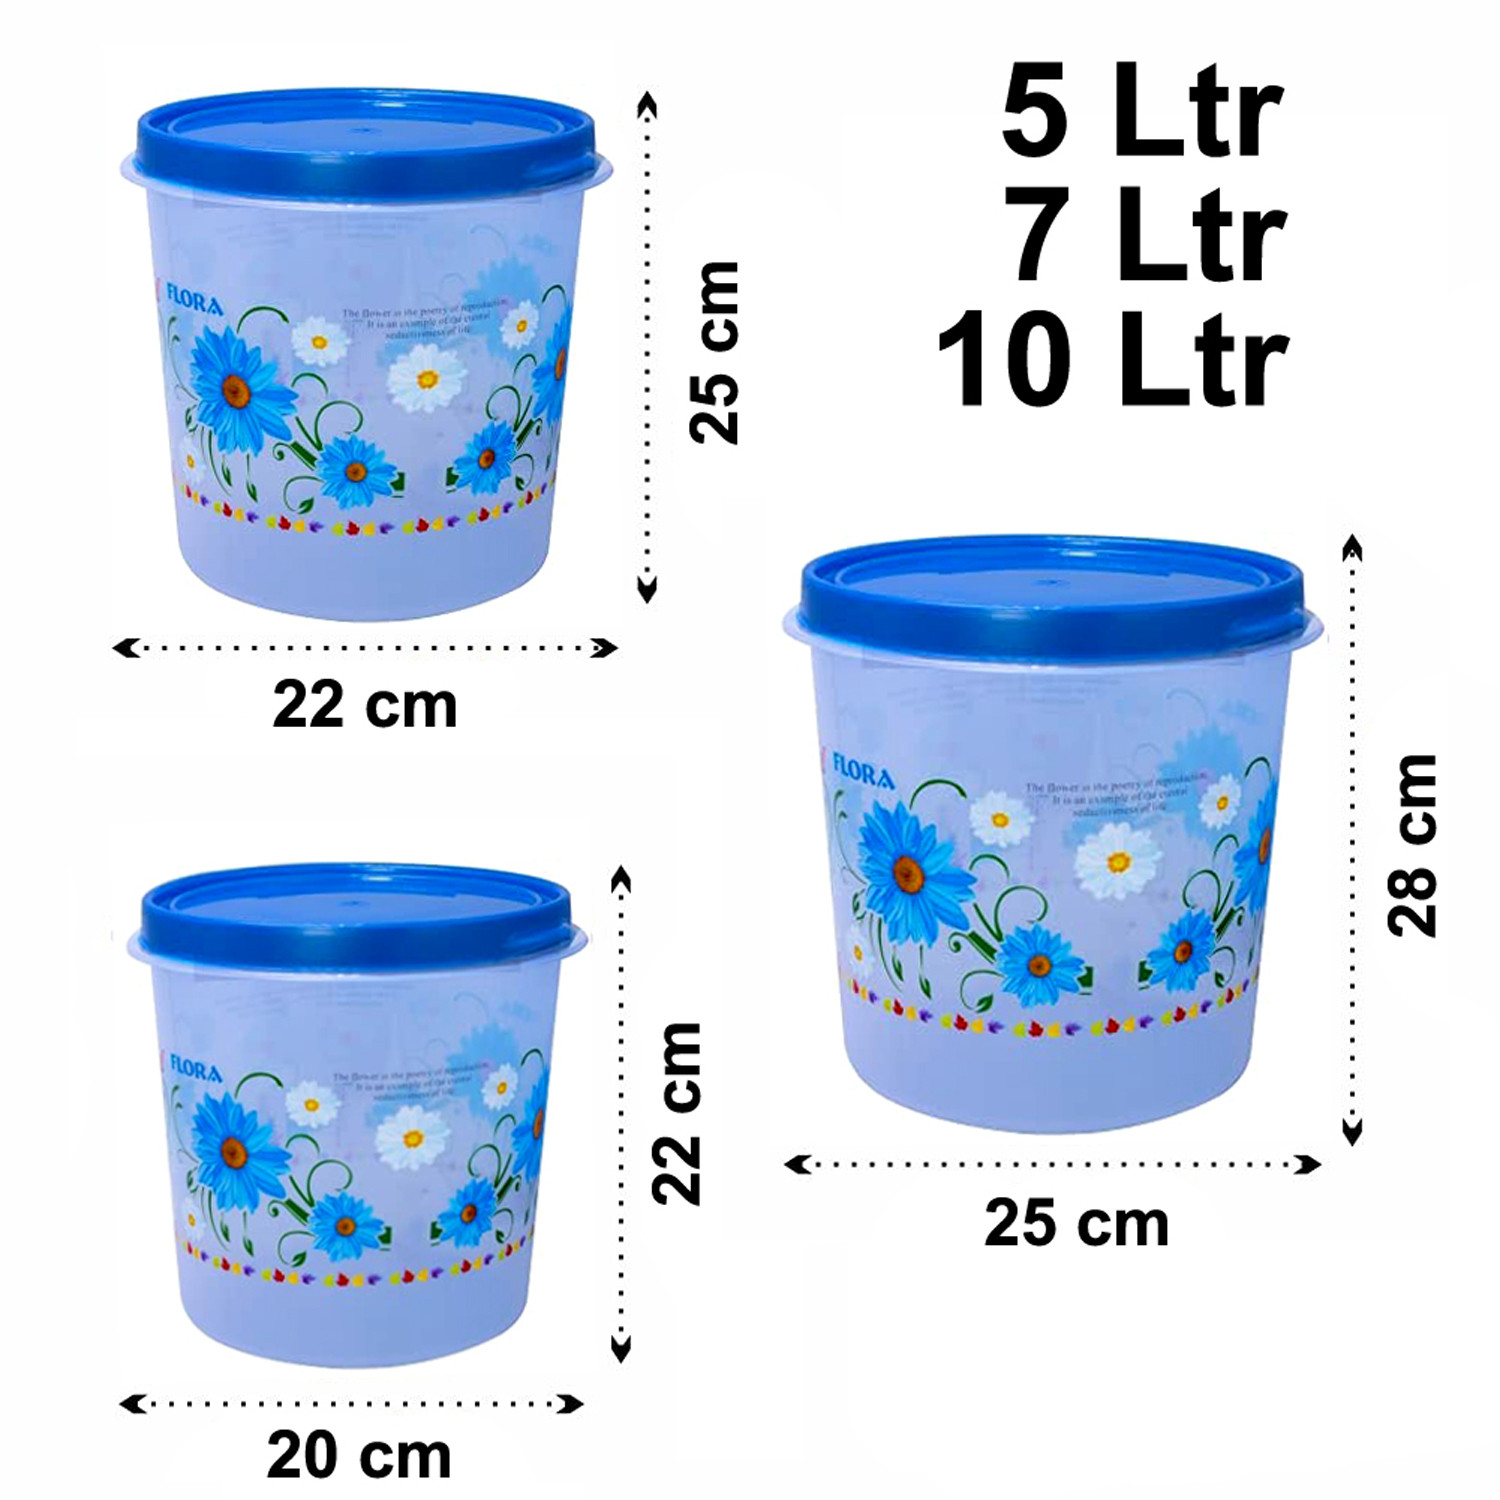 Kuber Industries Floral Plastic Airtight  Food Storage Containers, Kitchen Storage Containers For Food, Flour, Sugar, Baking Supplies, Set of 3 (Blue)